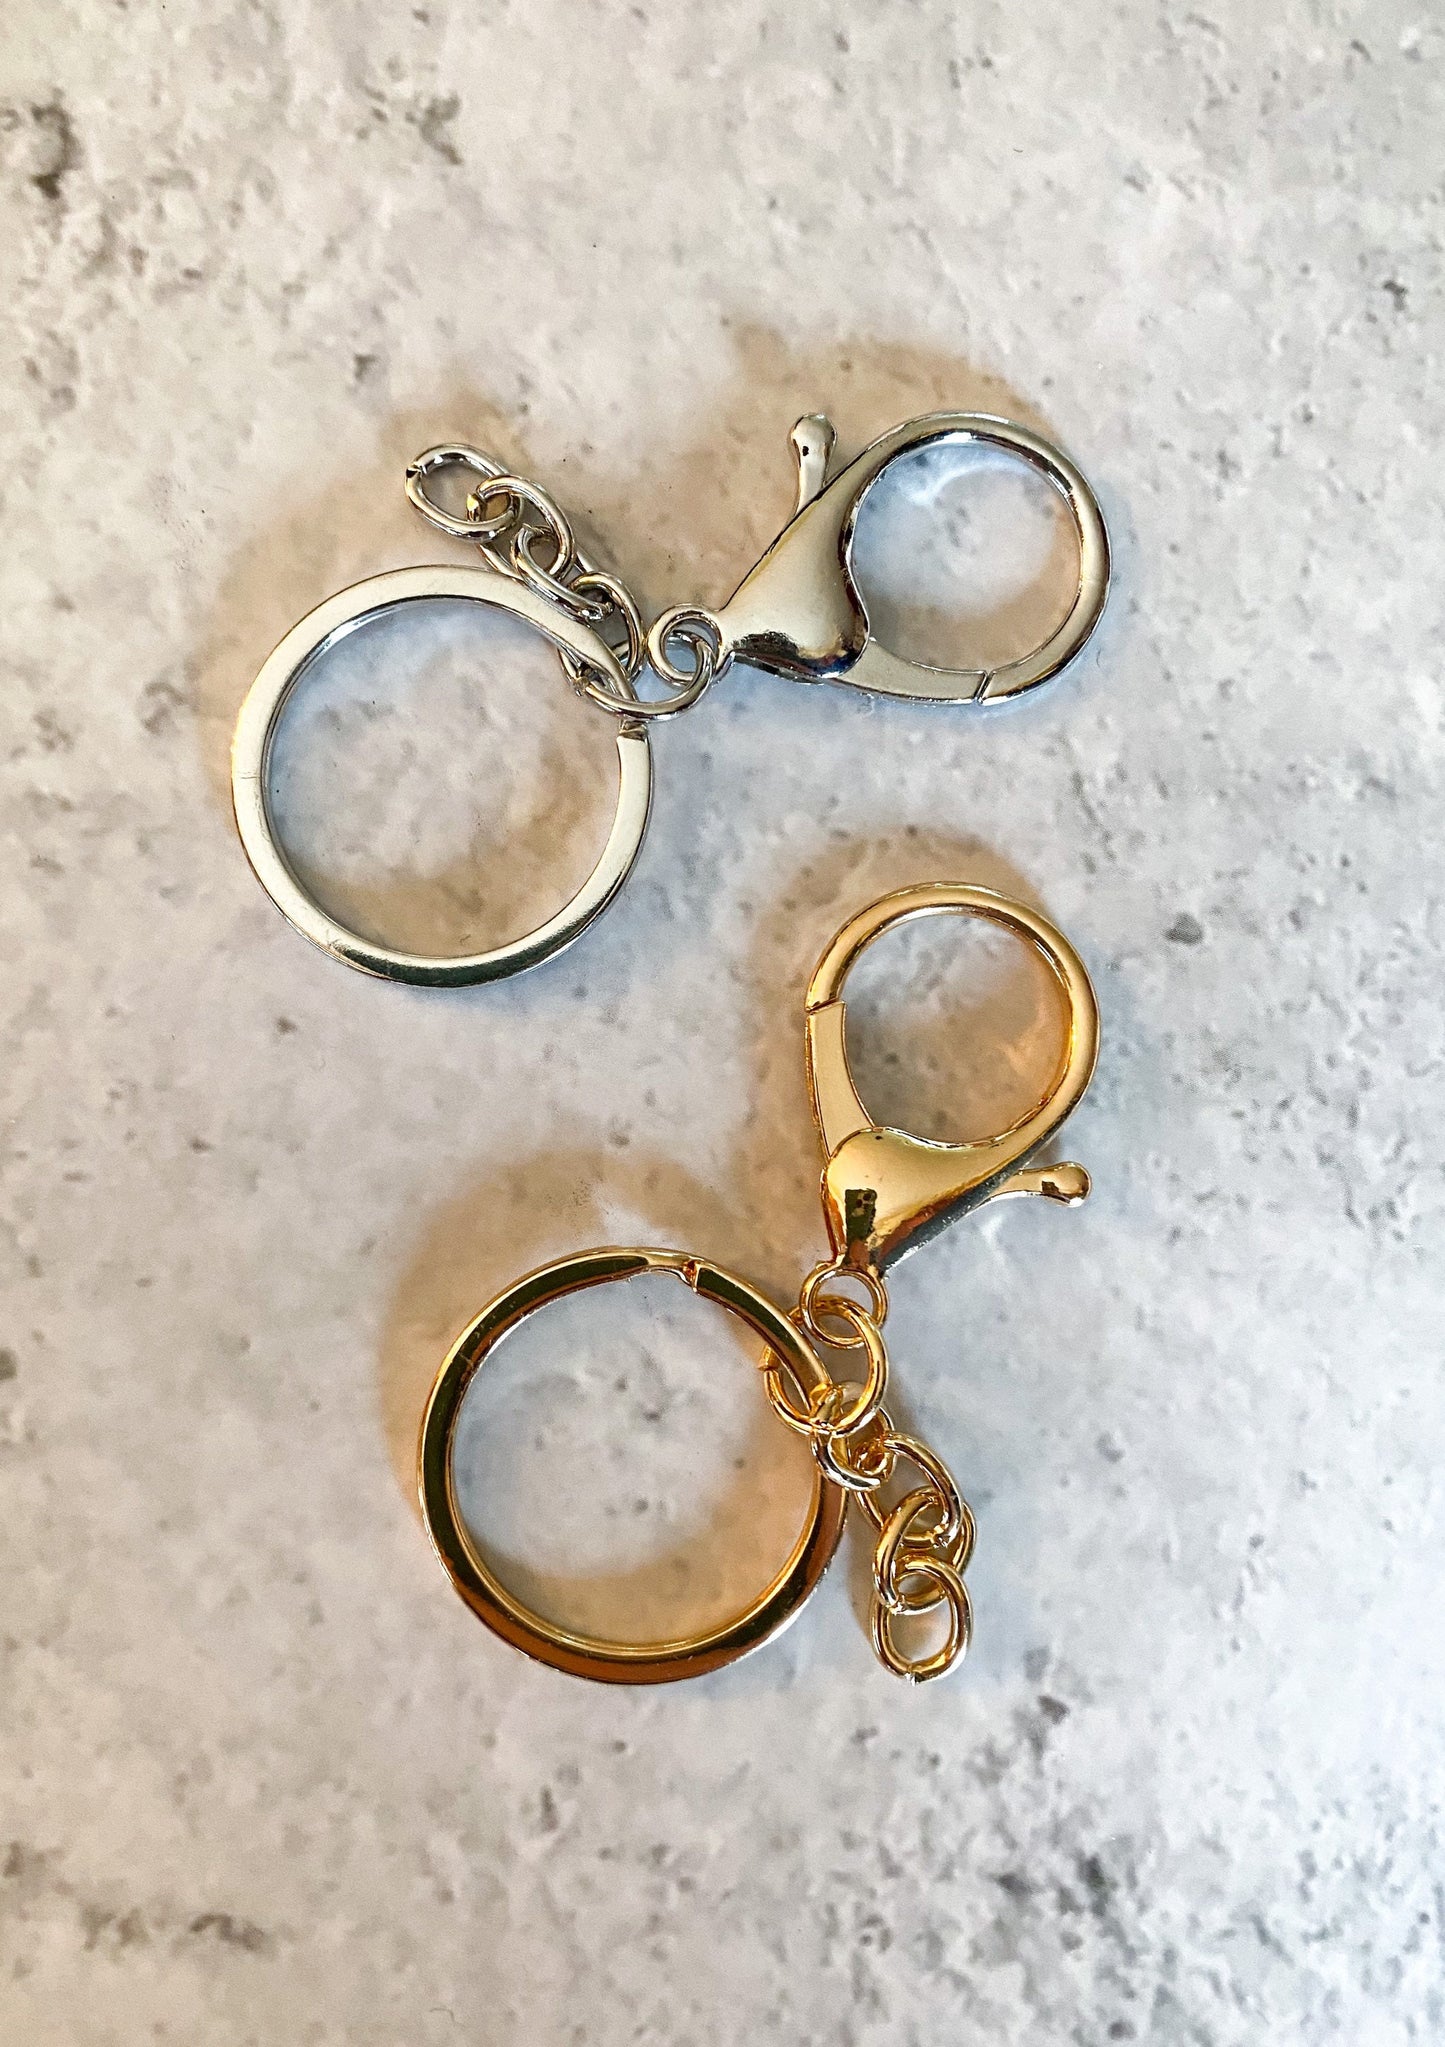 Personalized heart keychain with engraved text